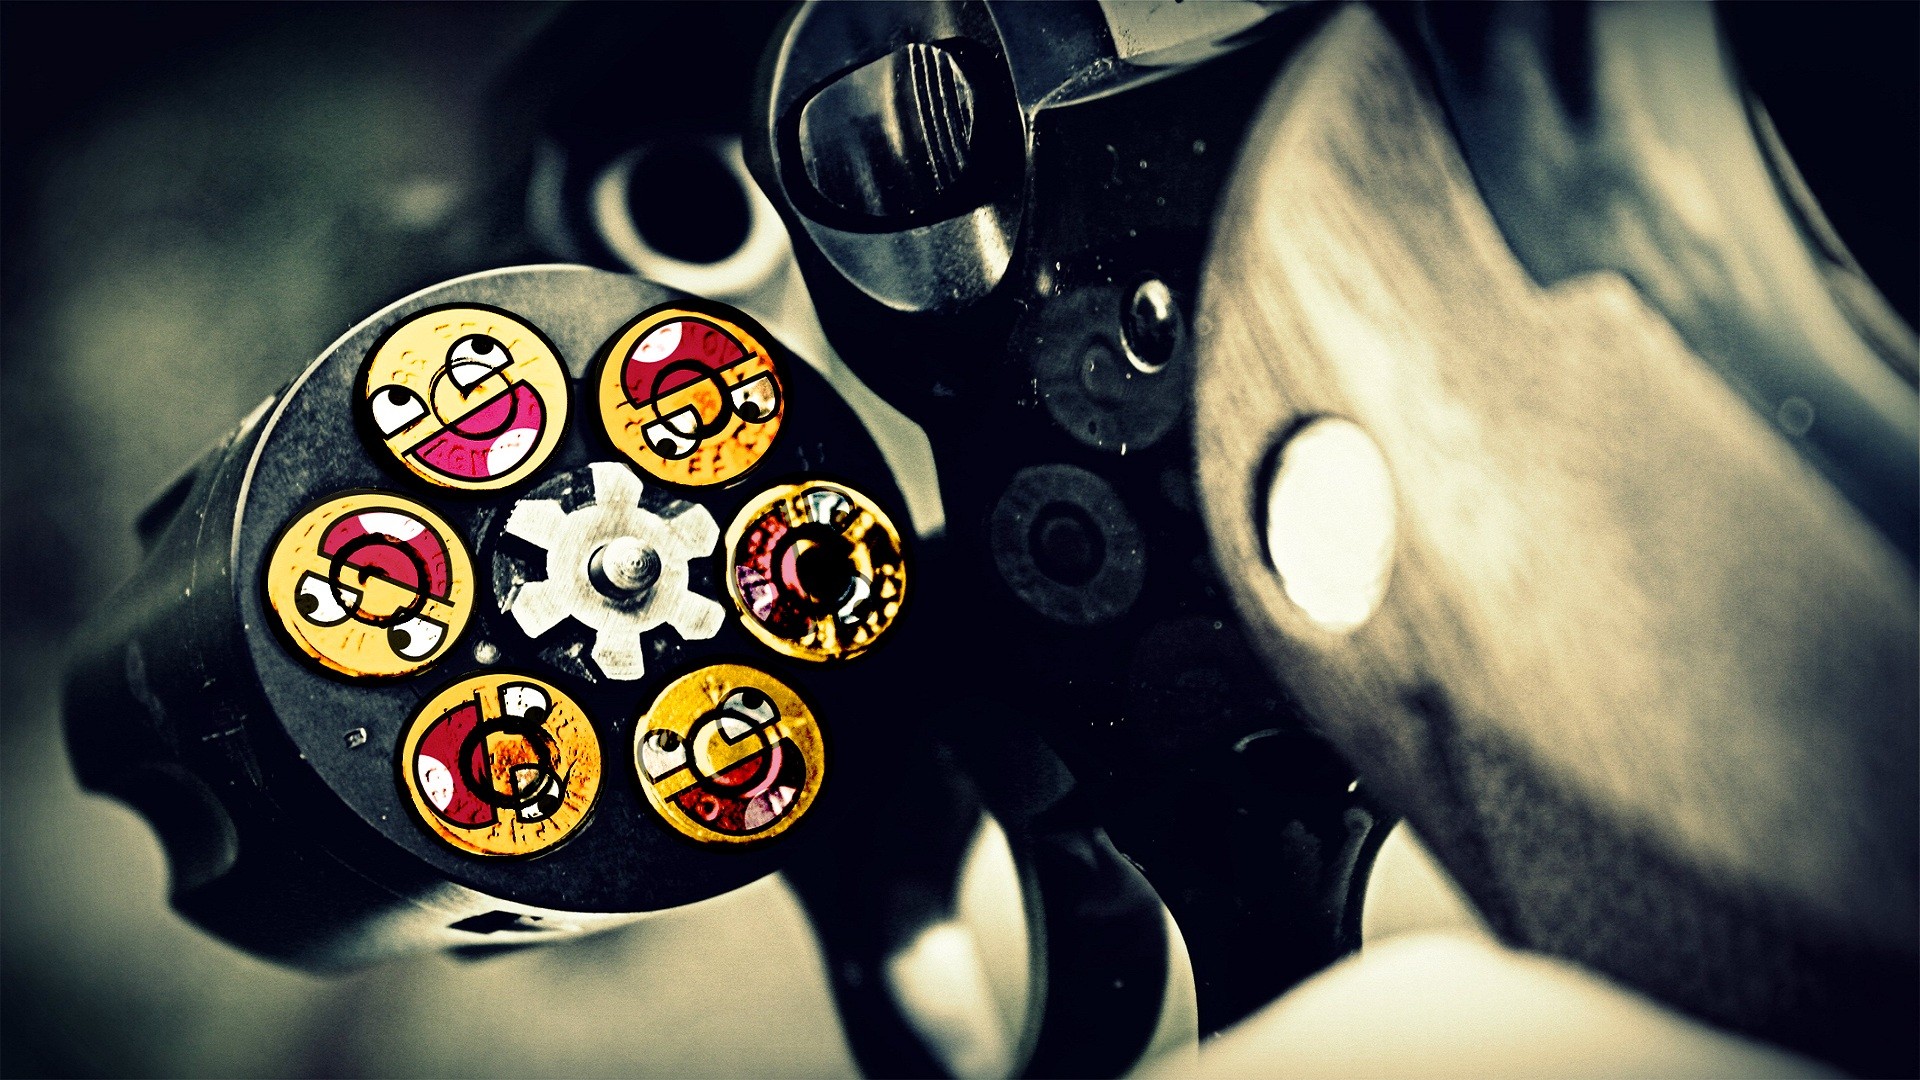 Cool Computer Wallpapers - Smiley Face Bullets - HD Wallpaper 